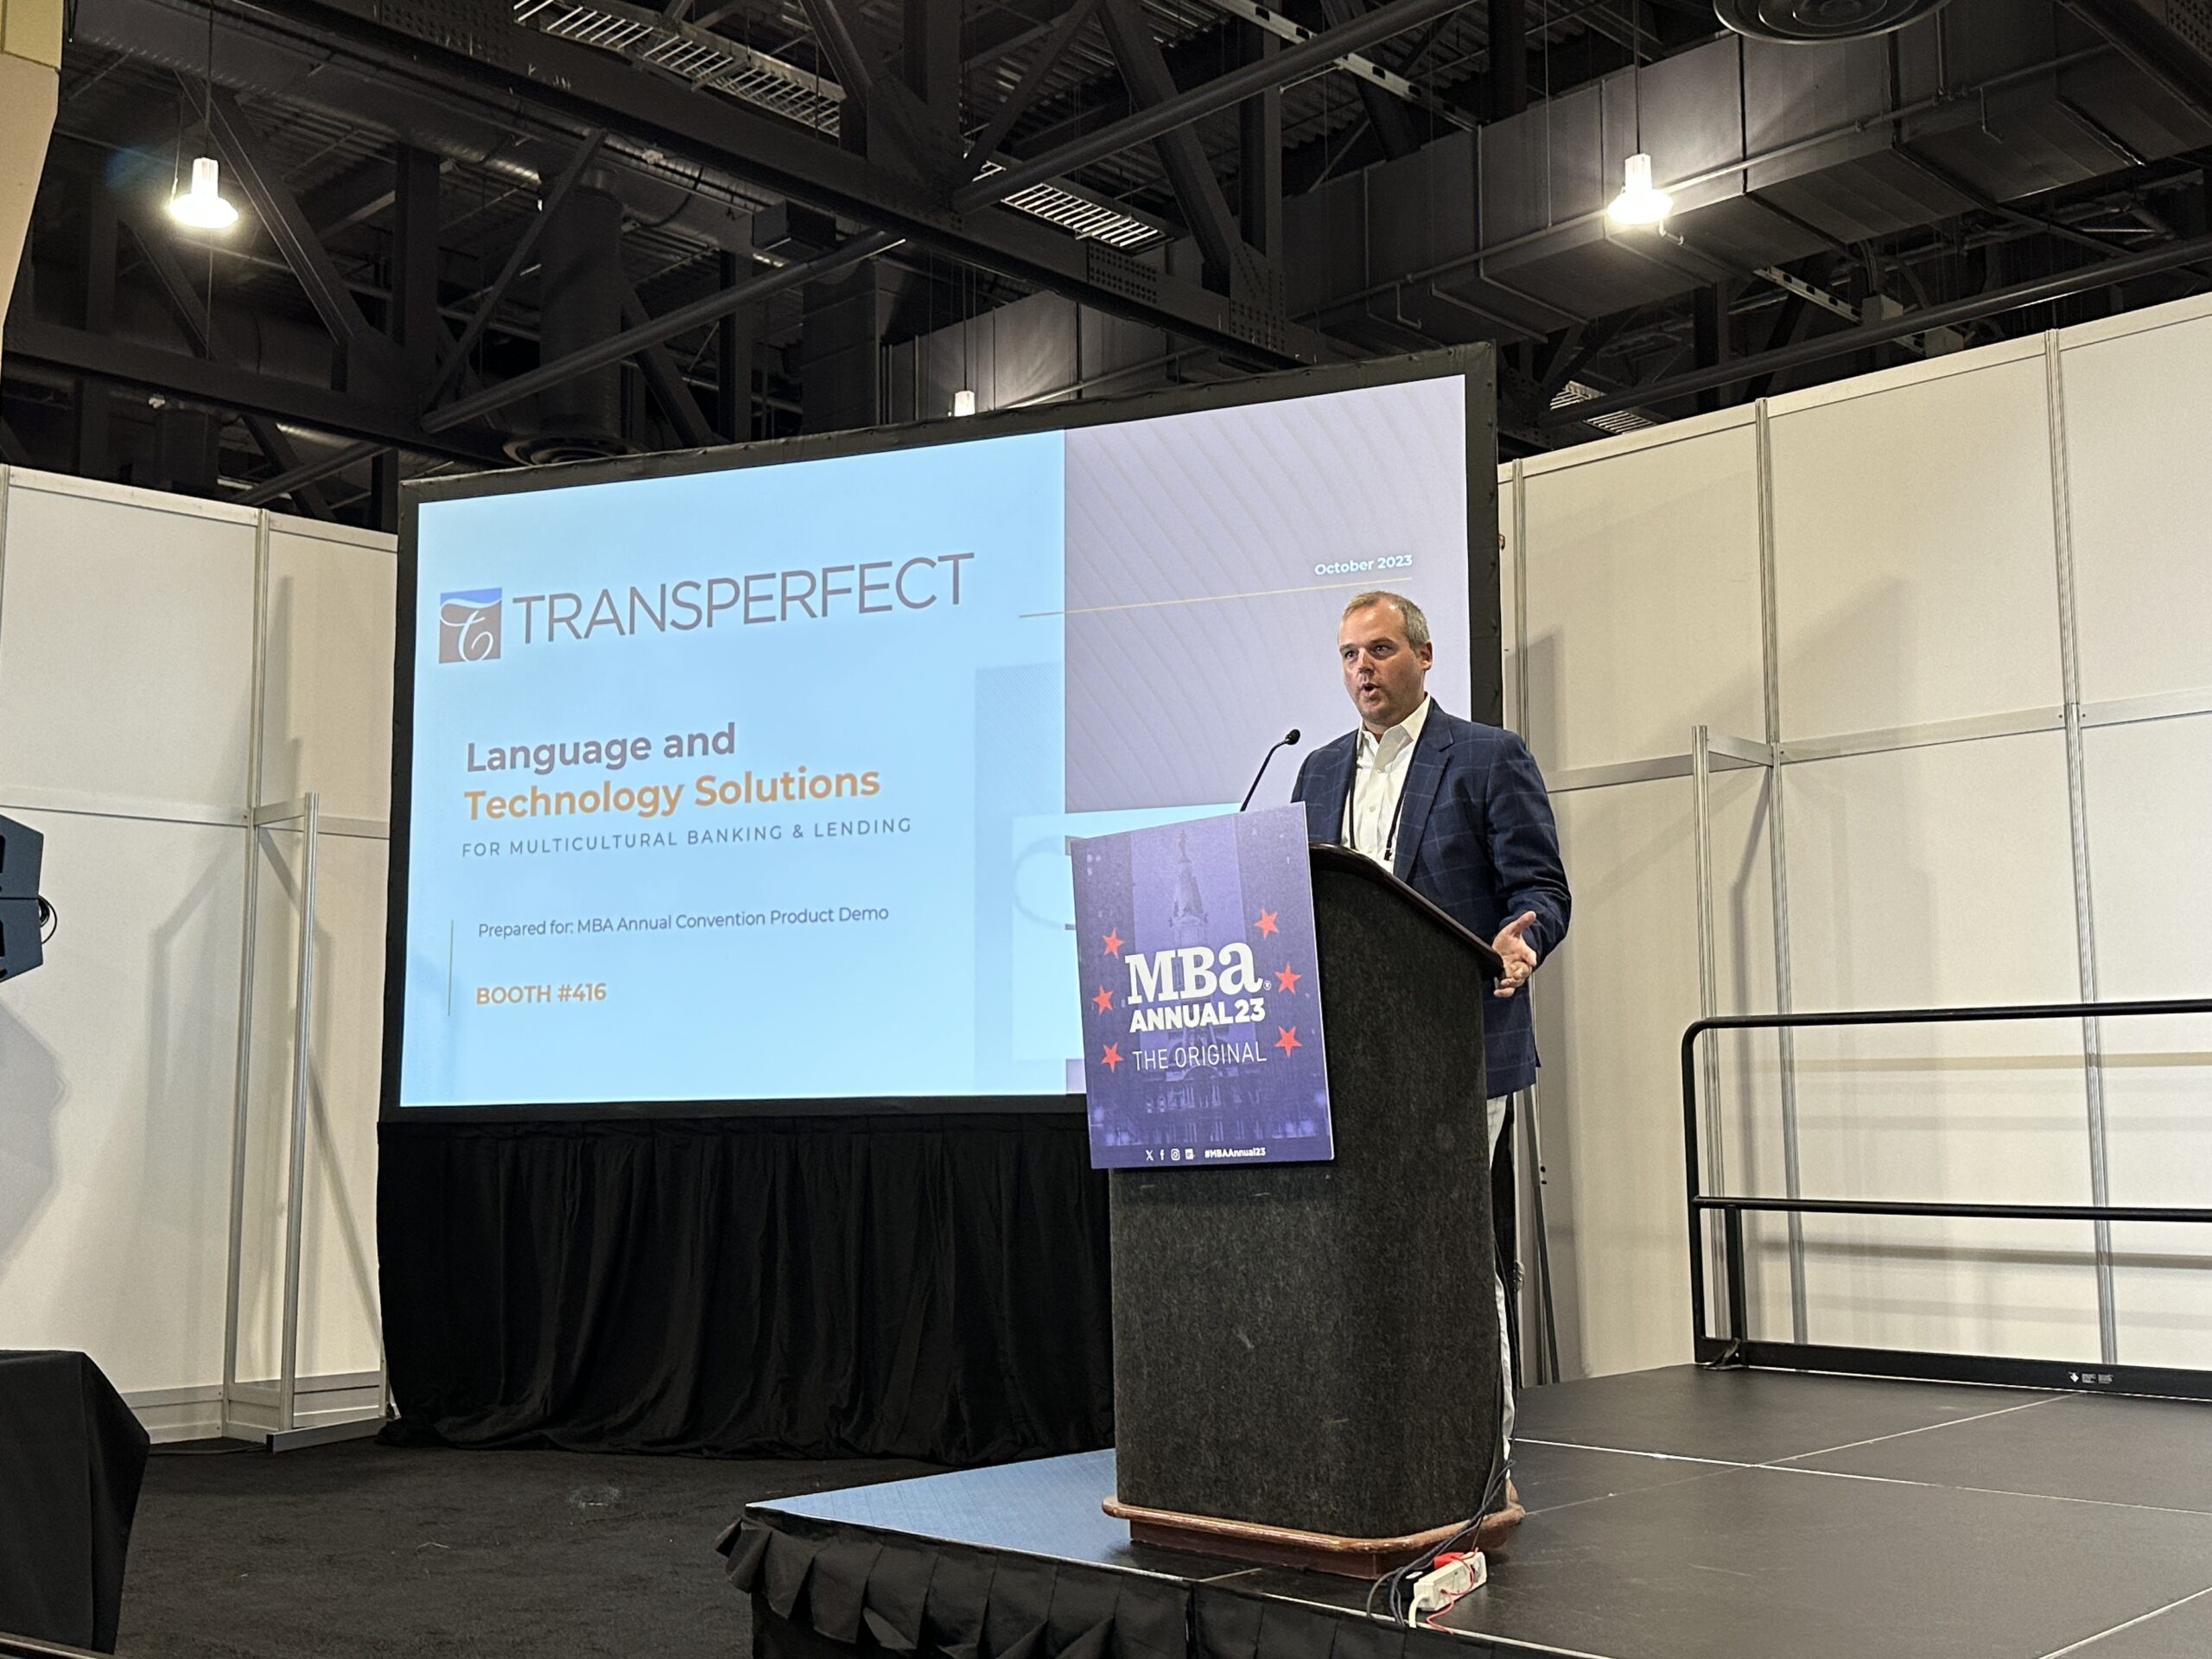 TransPerfect Tom Emery at Mortgage Technology Showcase, MBA Annual 2023 - The Basis Point